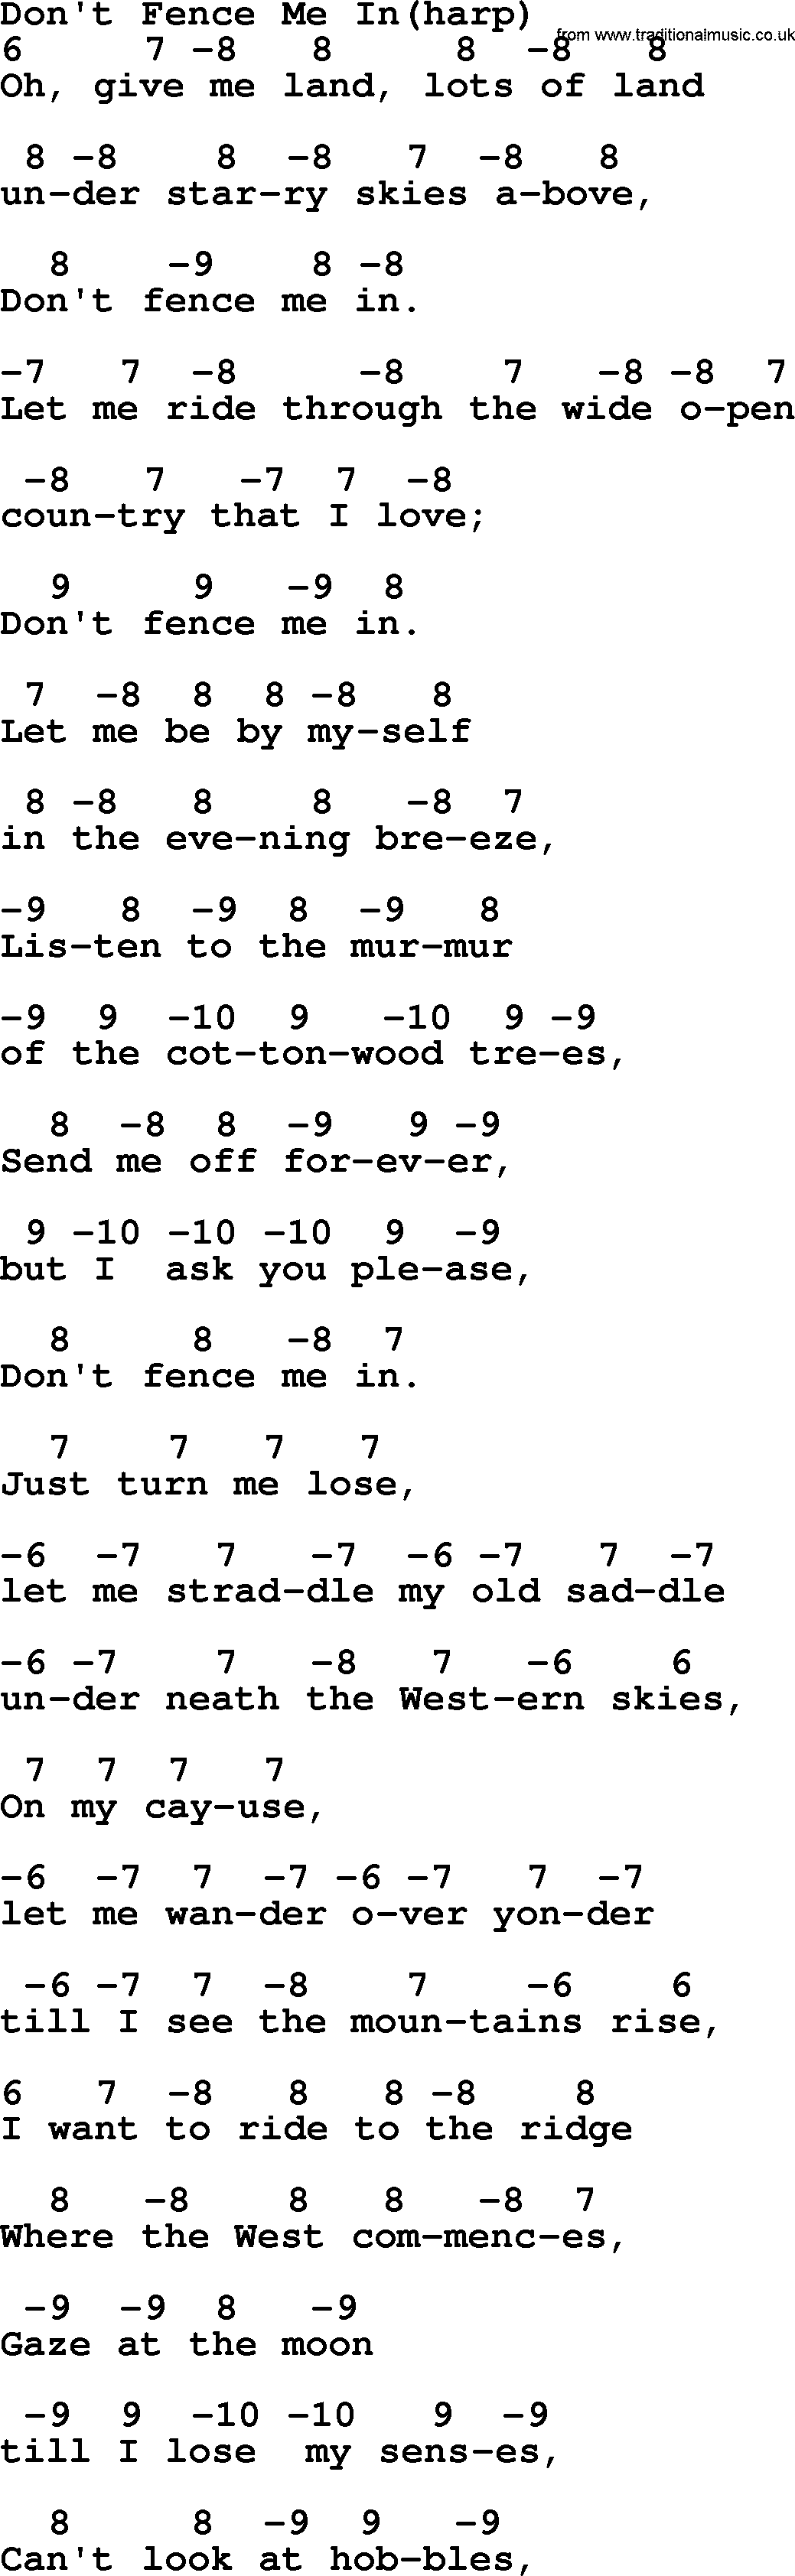 Bluegrass song: Don't Fence Me In(Harp), lyrics and chords